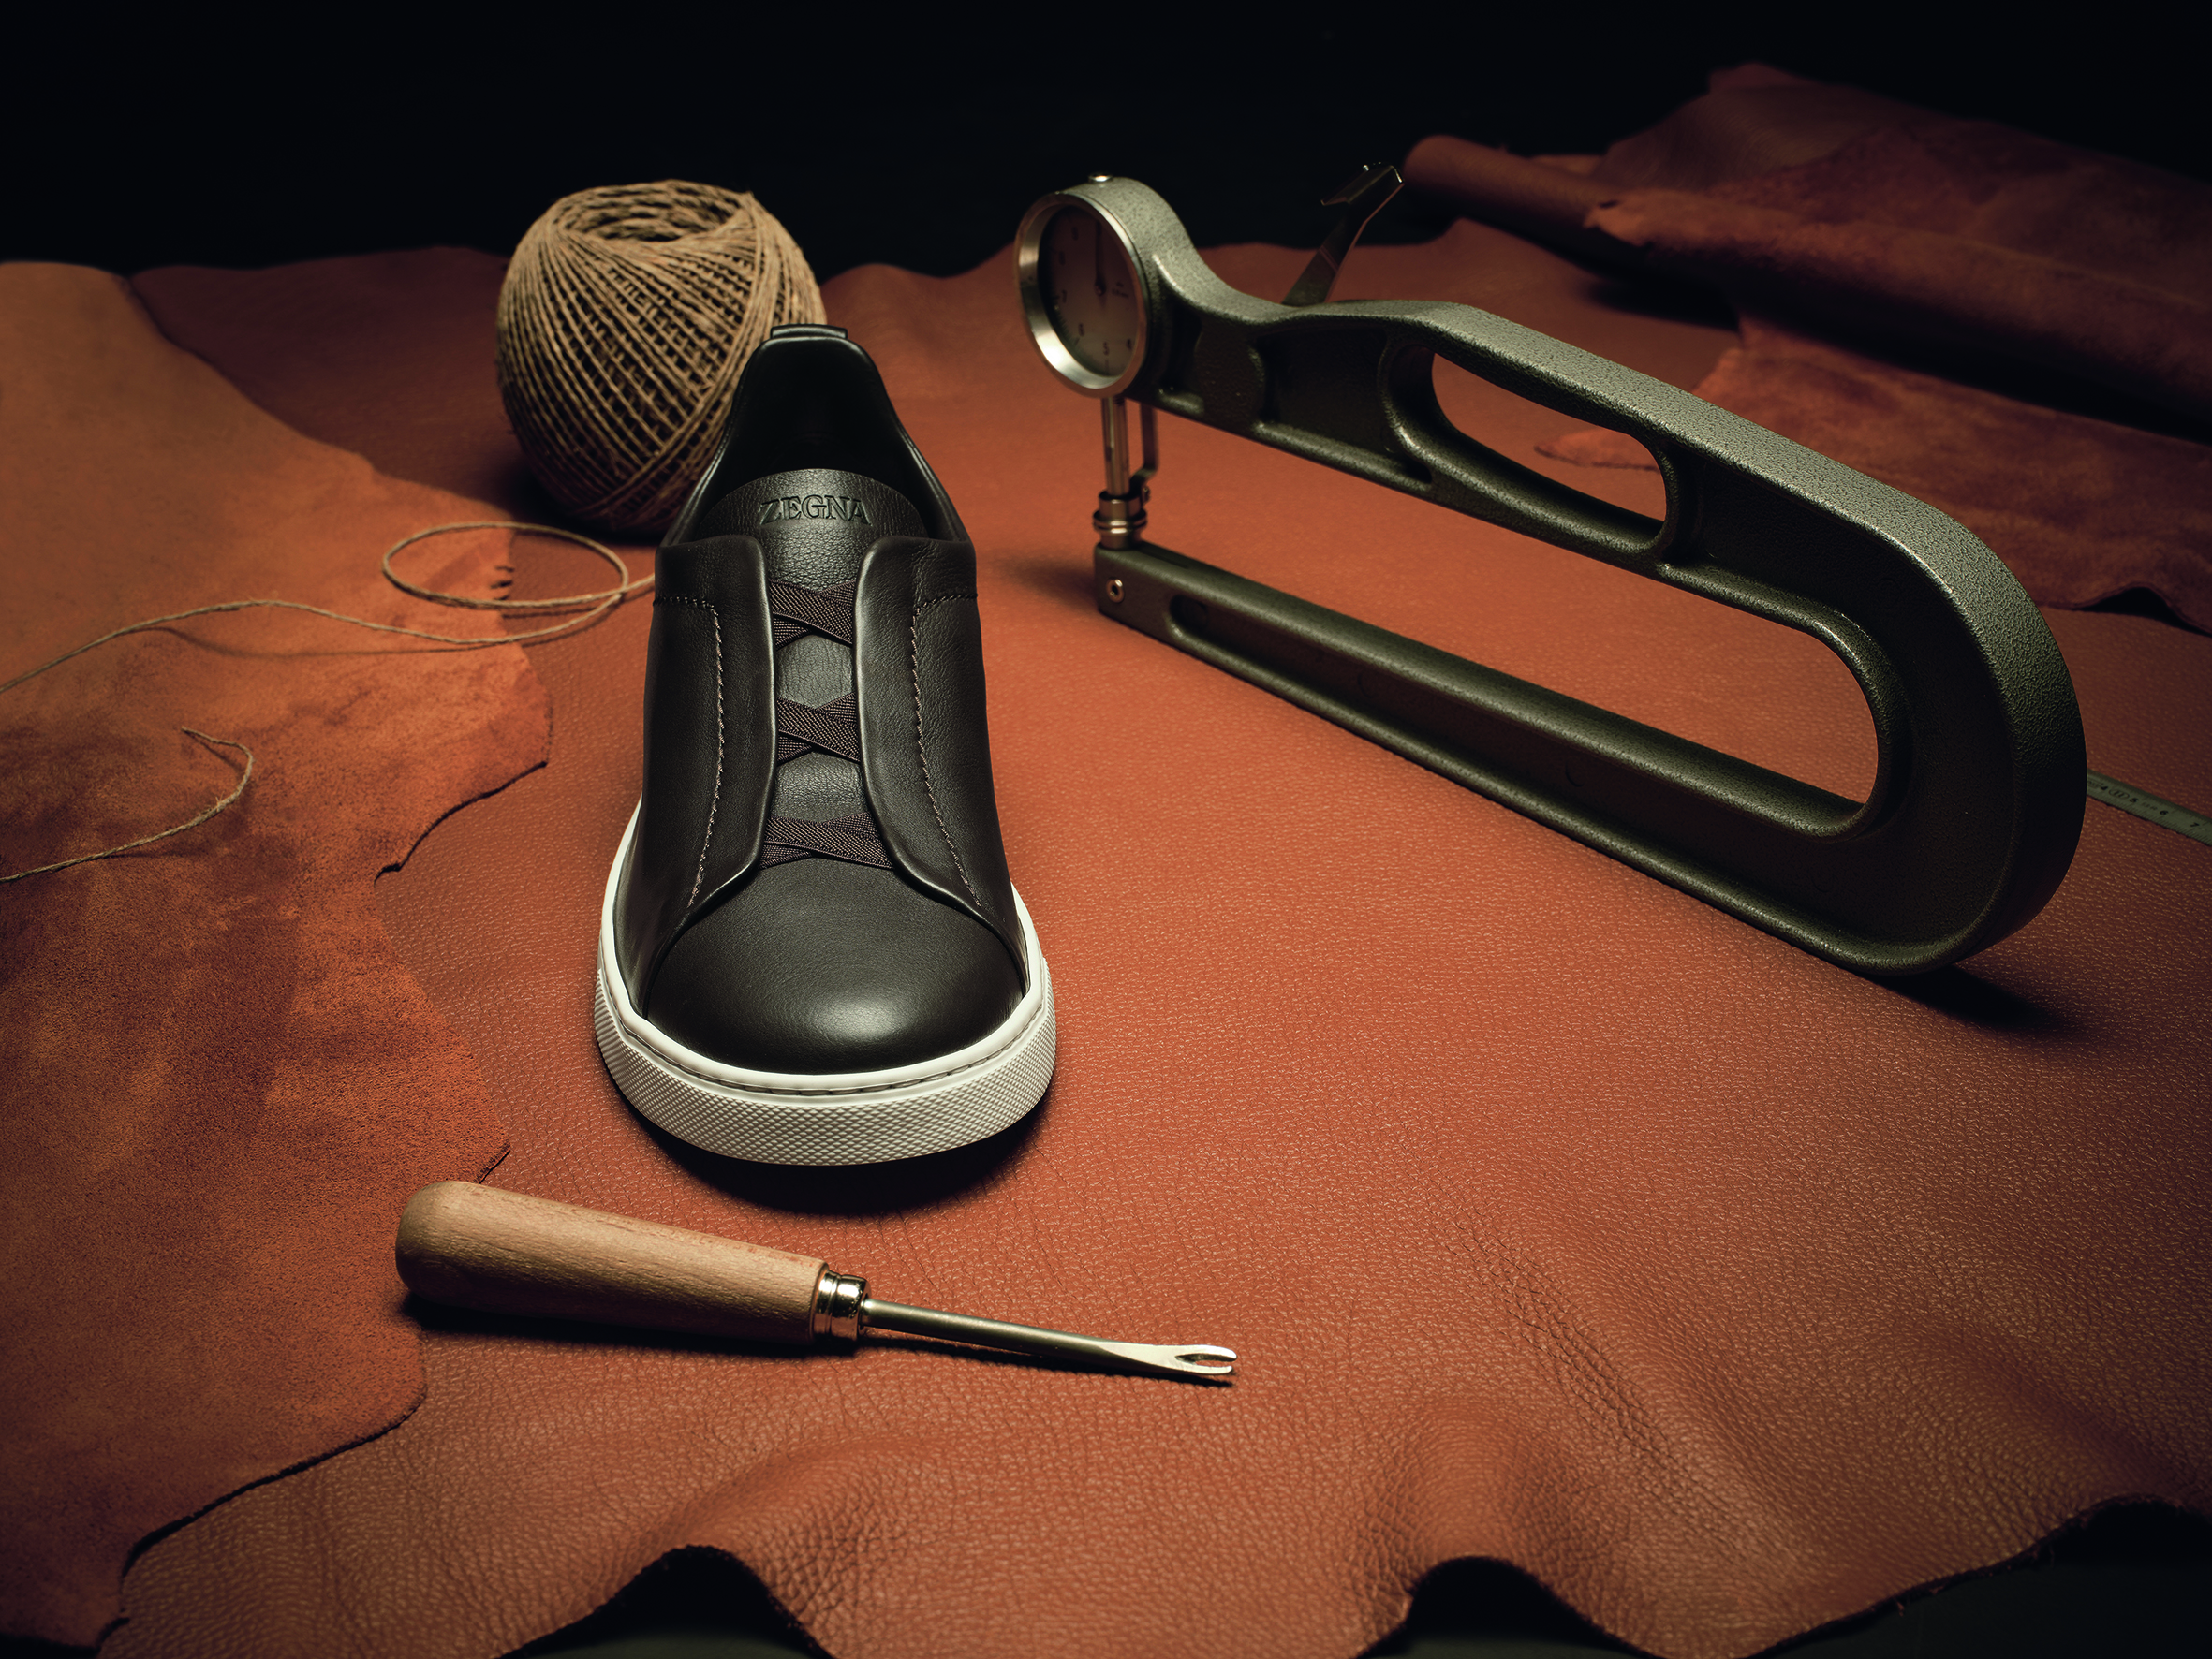 A completed black Zegna Triple Stitch Secondskin shoe is placed on a large piece of tawny leather, surrounded by a spool of thread, a shoemaker's awl, and a metal shoe stretcher in a dimly lit workshop setting.